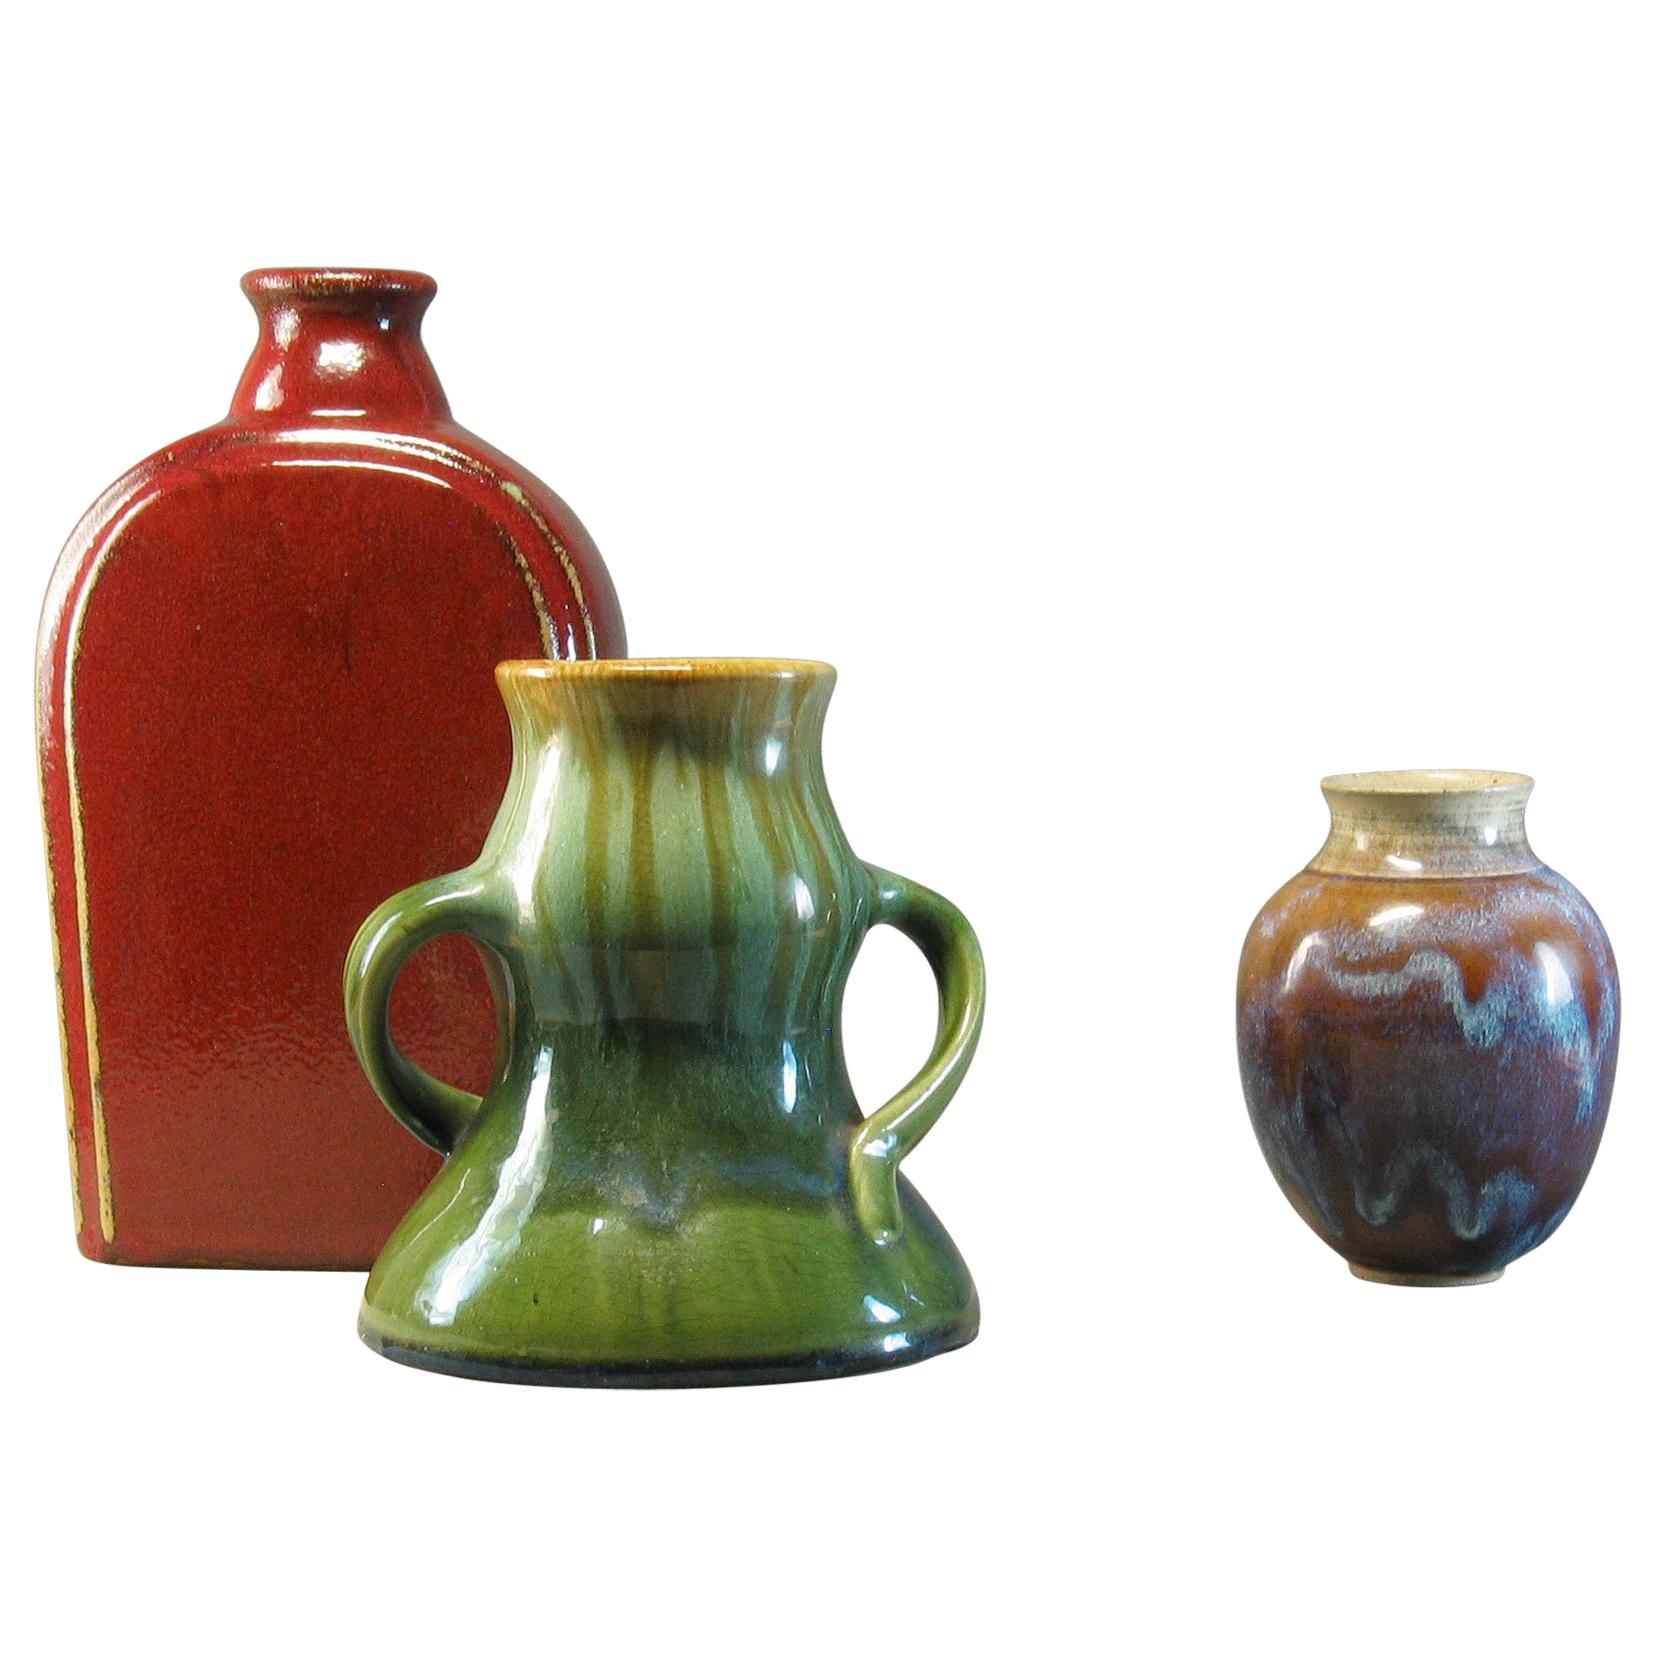 Group of Three 20th Century Art Pottery Pieces